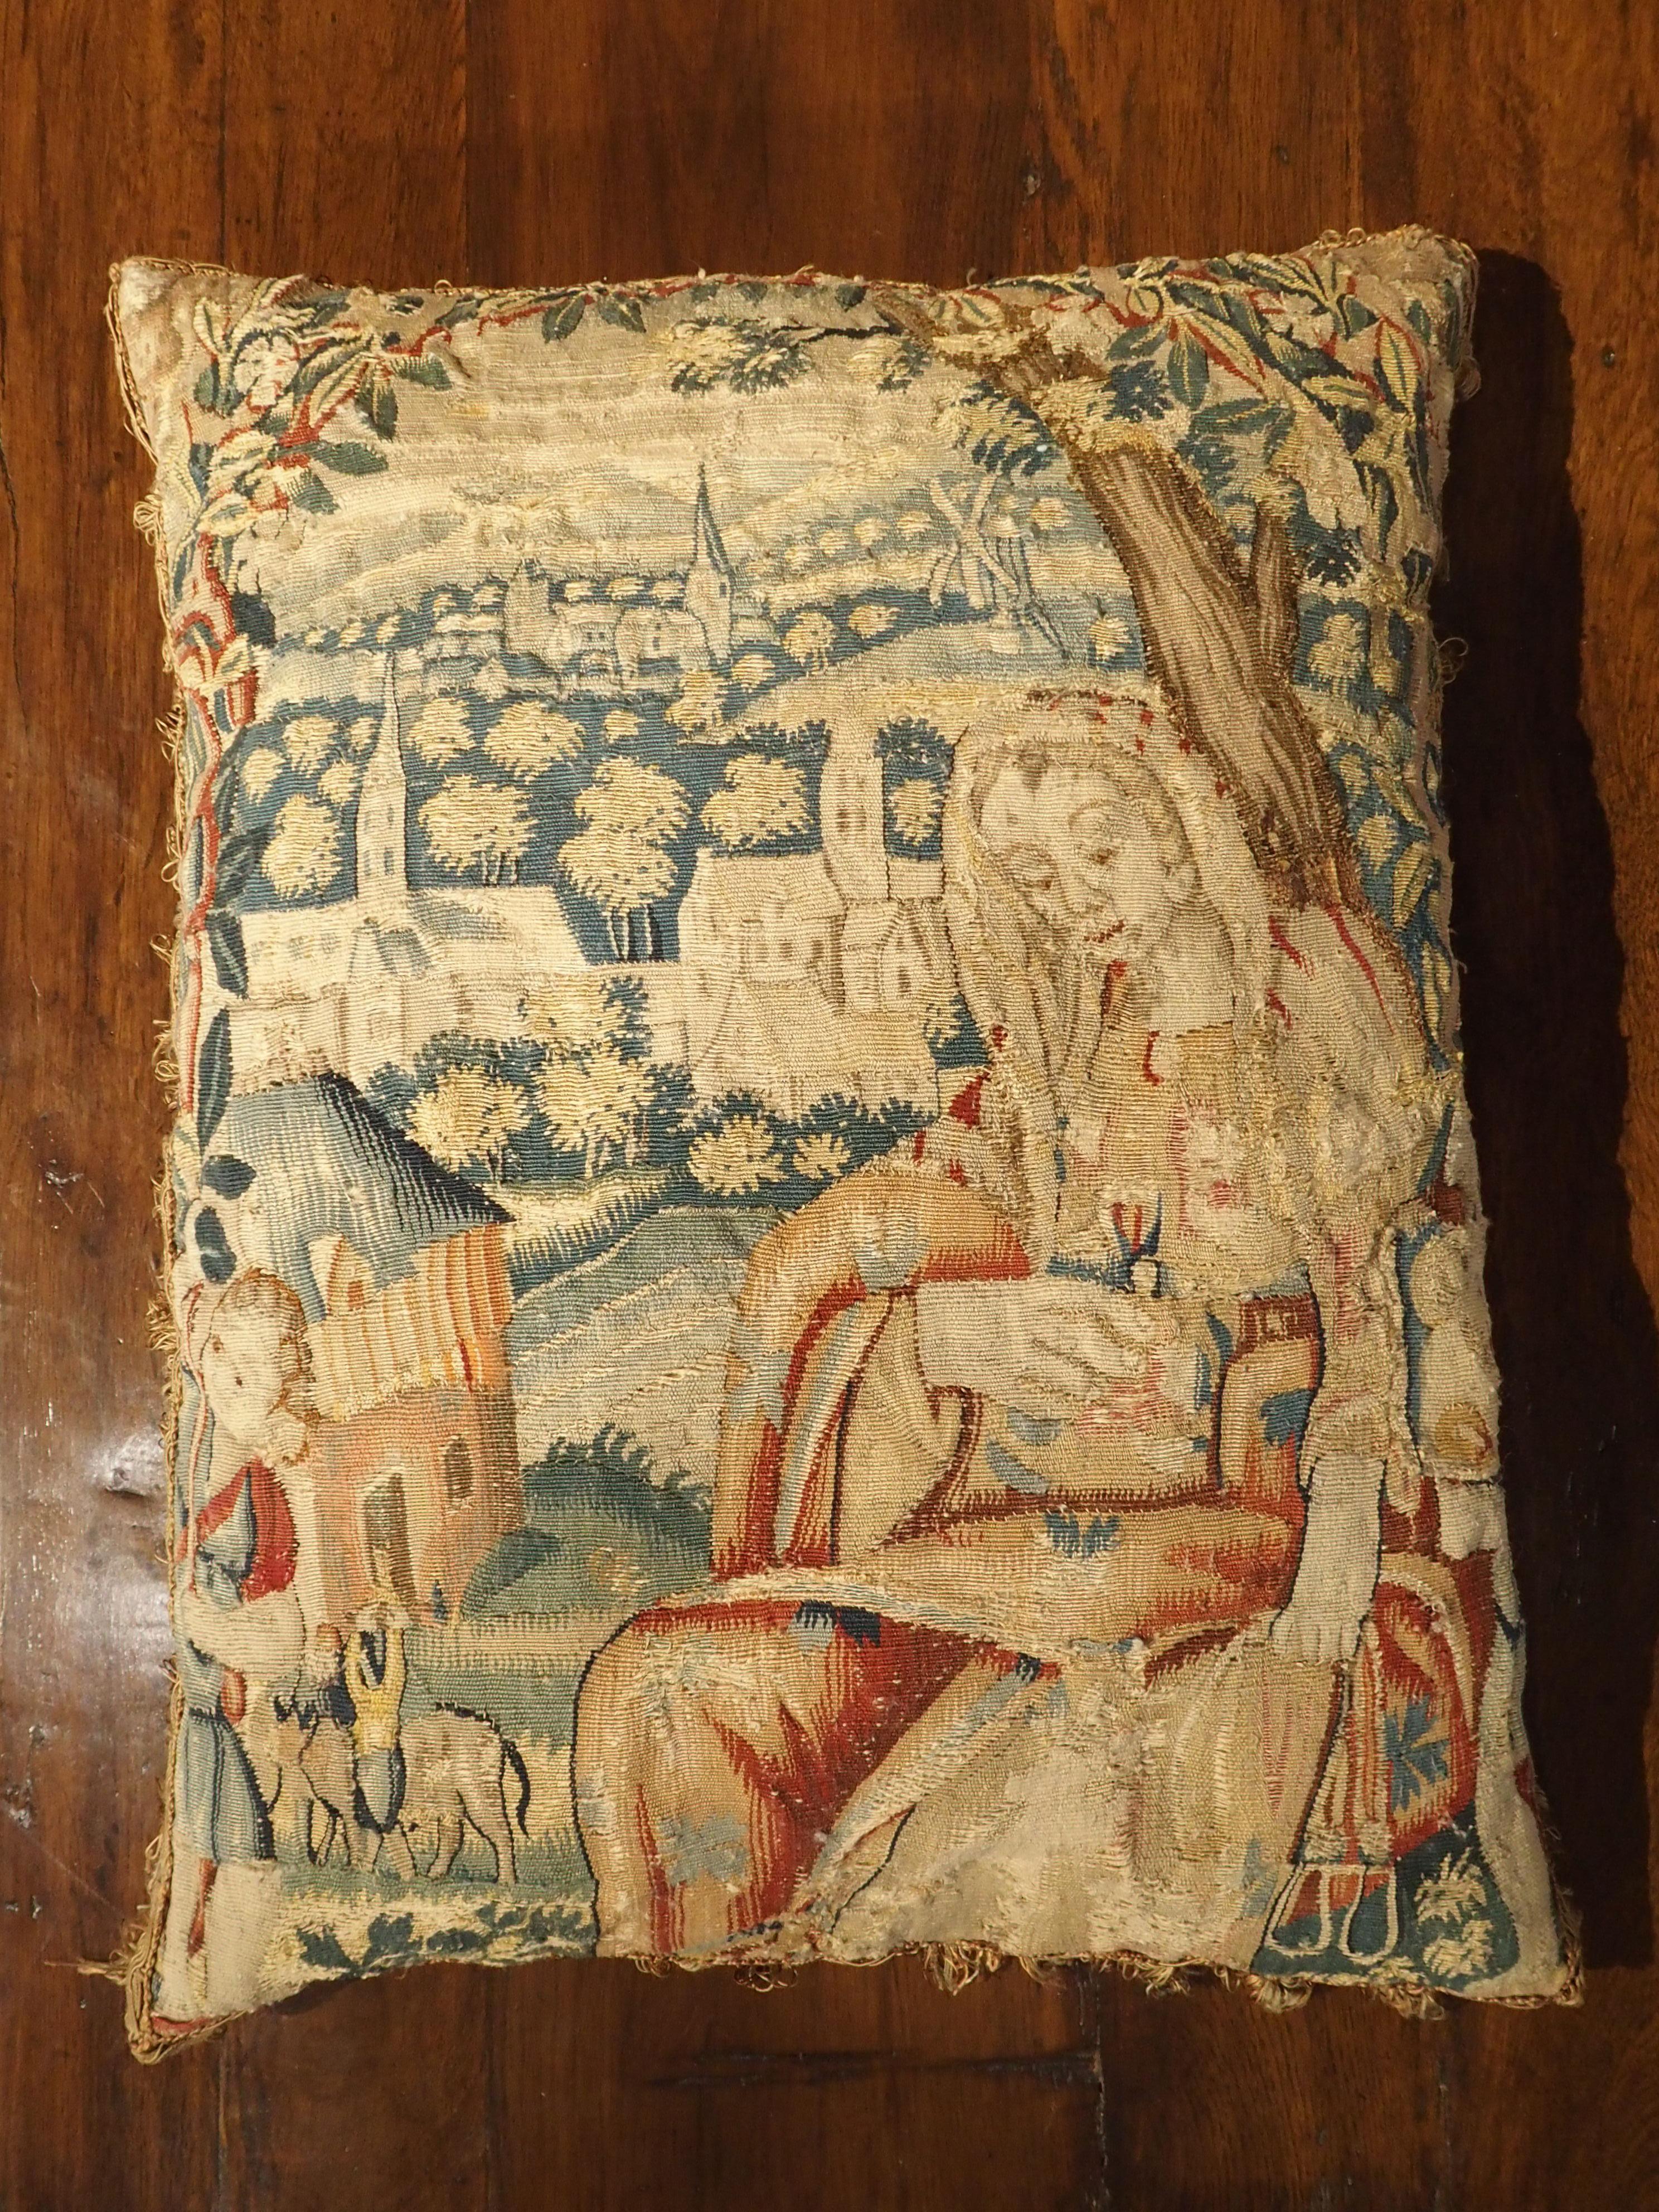 From France, this beautiful tapestry pillow dates to the 1600s. The scene depicts a woman in the foreground, sitting under a tree with stirrups in her hand. On the left side of the pillow, as the scene fades into the background, we see smaller